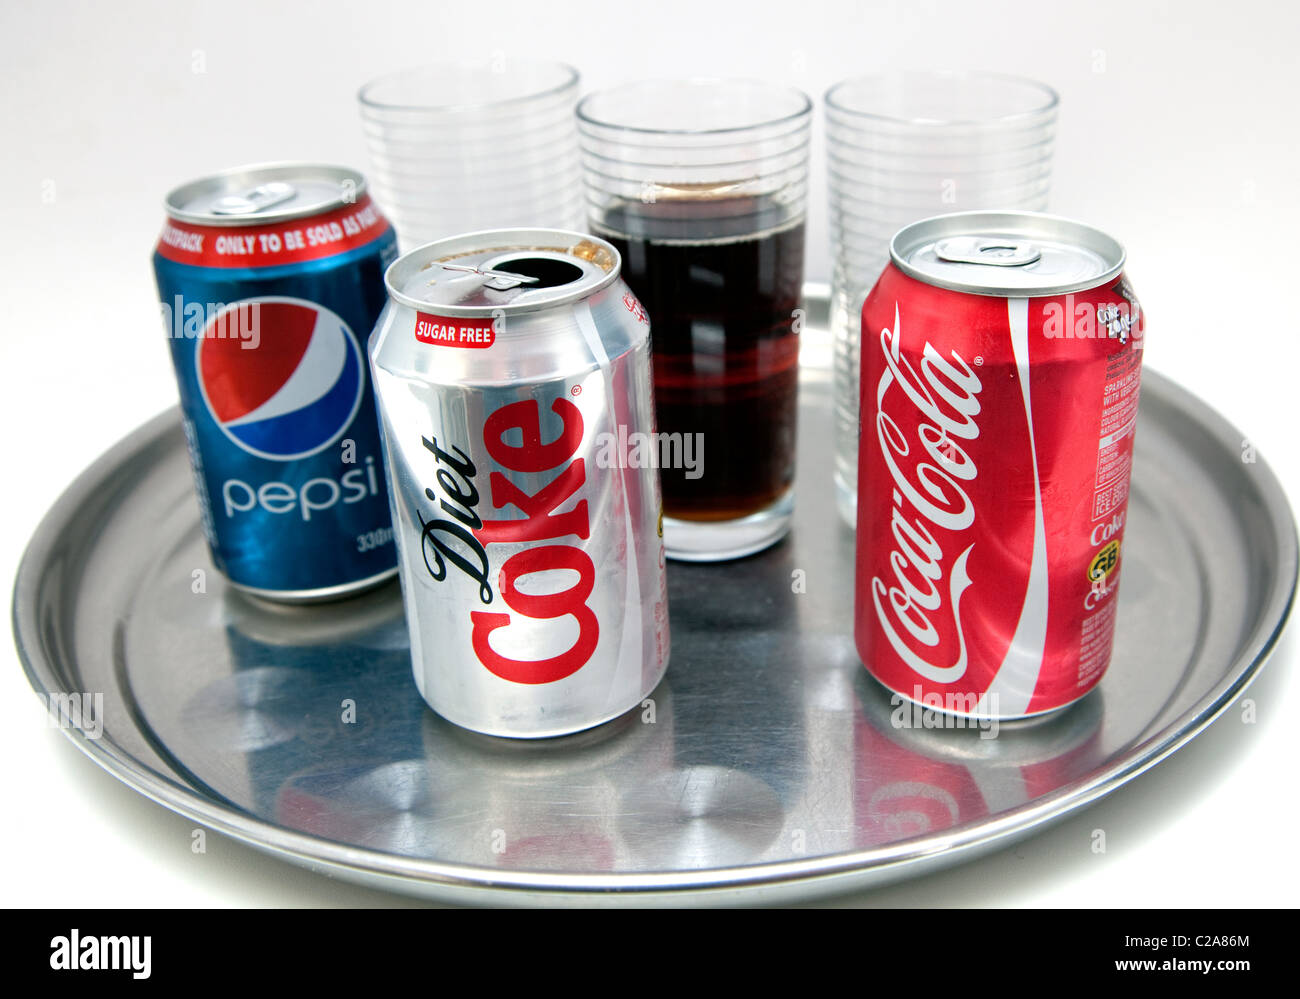 Cans of cola soft drinks, London Stock Photo